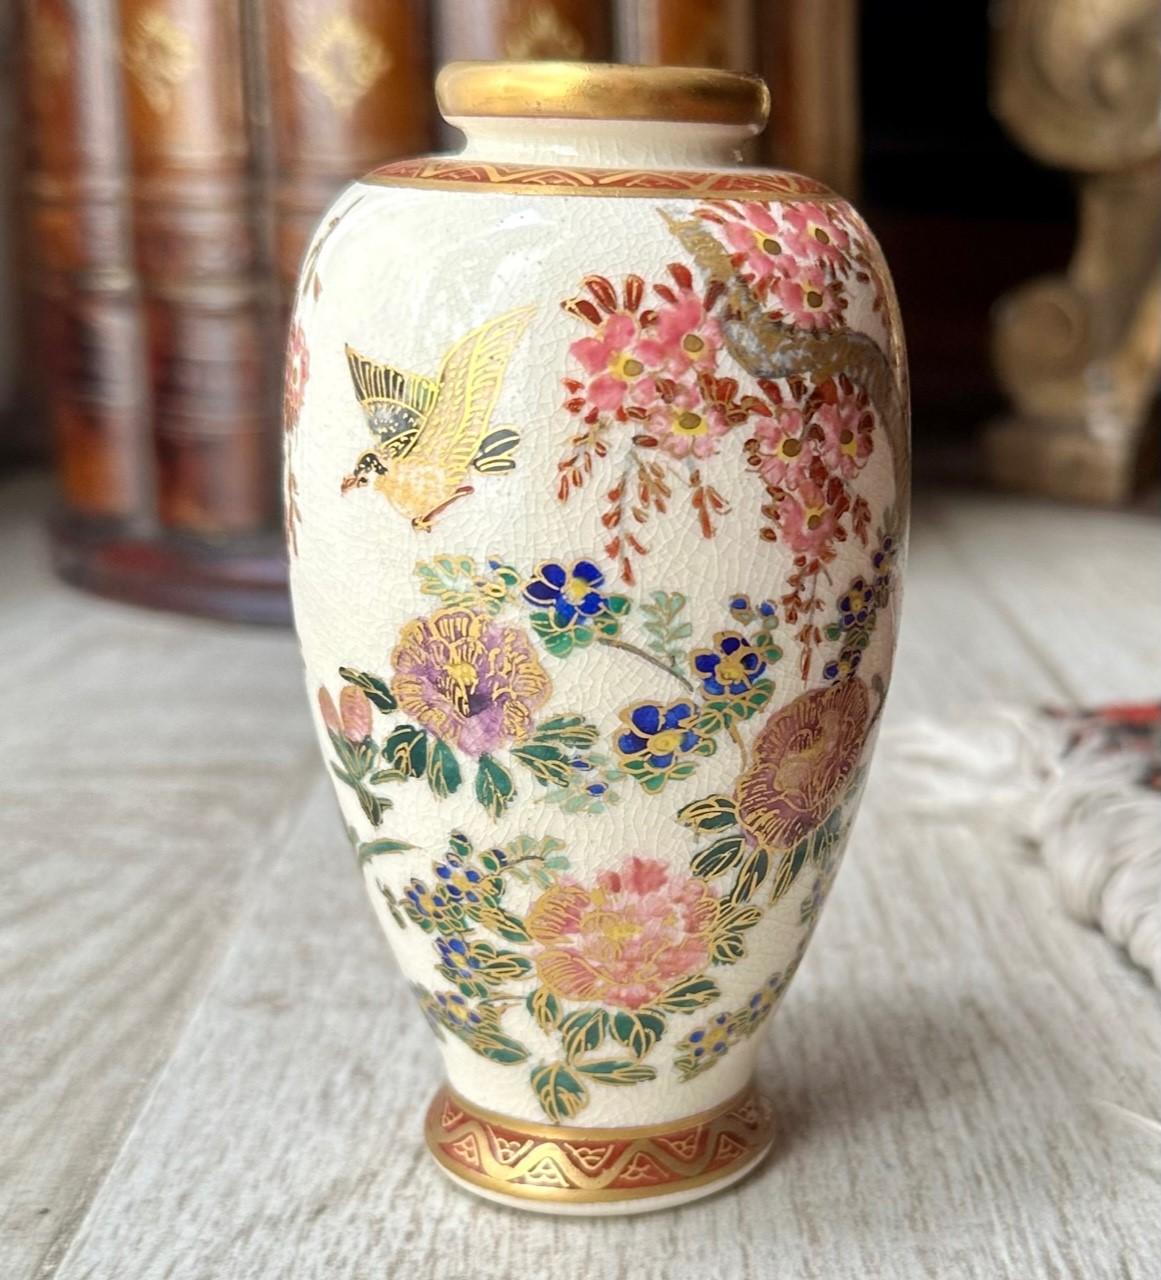 Meiji Period Diminutive Satsuma Baluster Vase.

This Japanese Satsuma vase from the late Meiji period is hand painted and gilt decorated with a Japanese landscape in exquisite detail. The scene in nature is lush with hanging boughs of flora and two